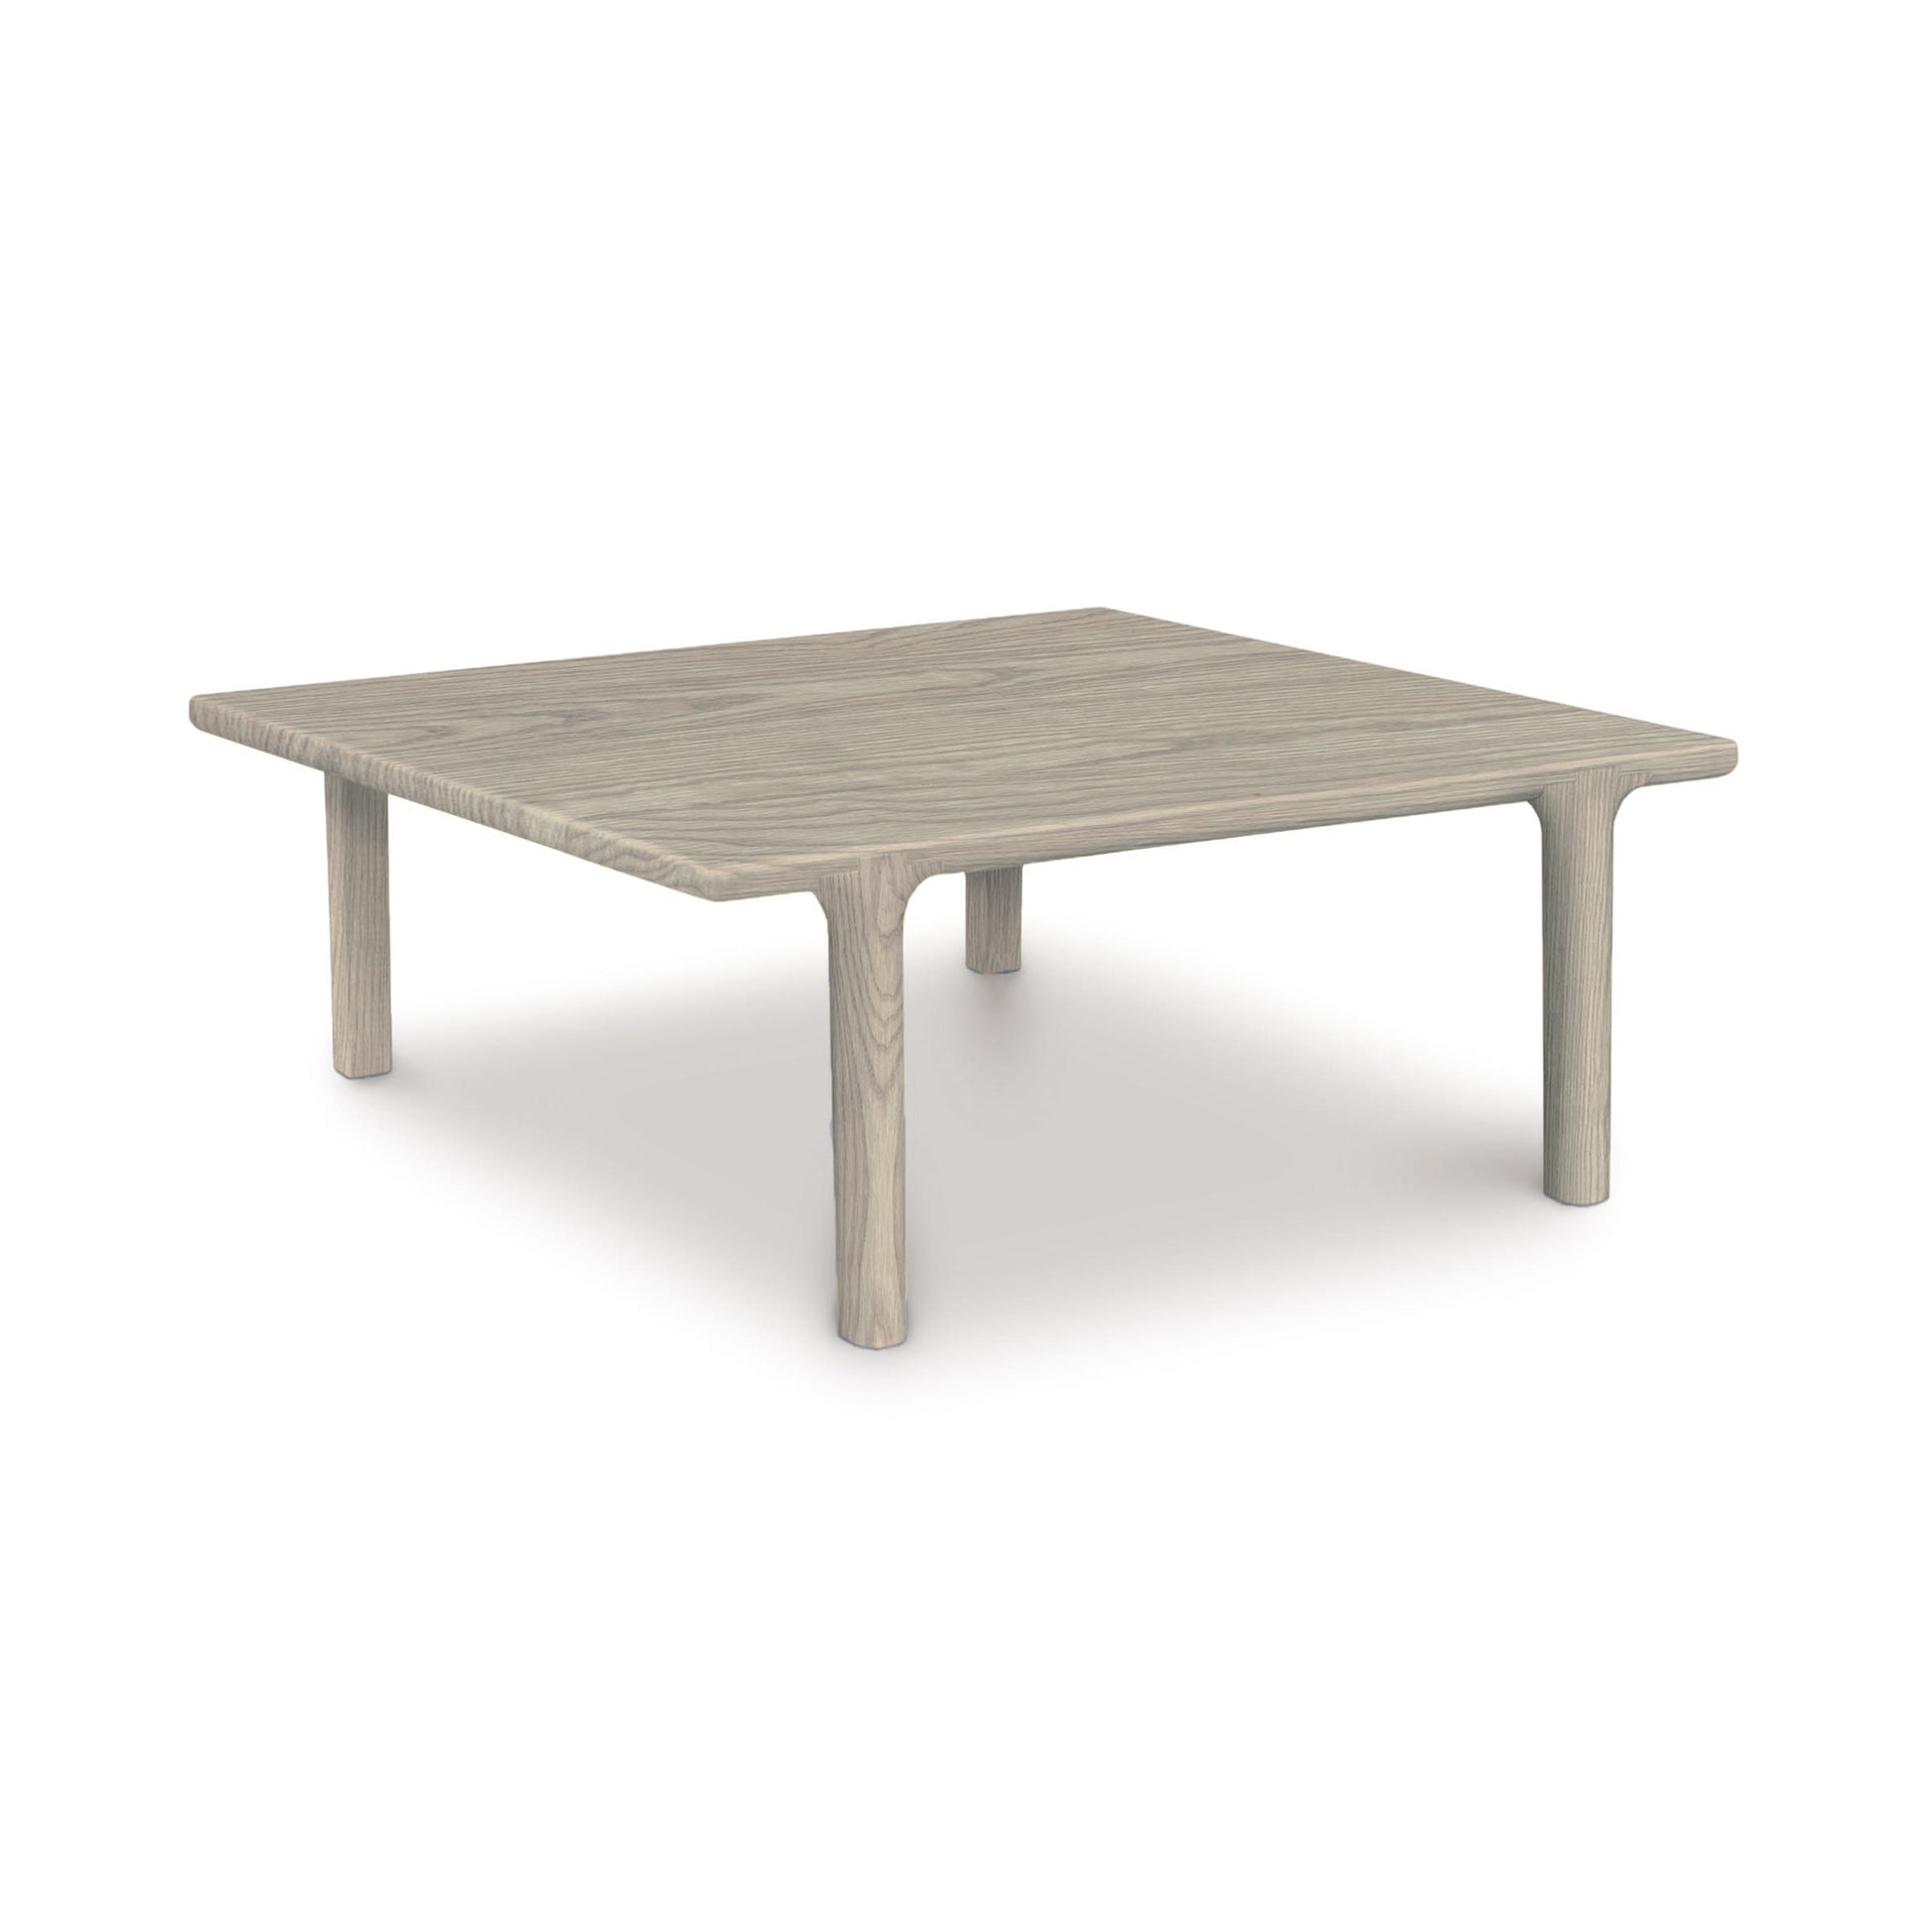 A Copeland Furniture Sierra Square Coffee Table crafted from North American hardwood, positioned against a white background.